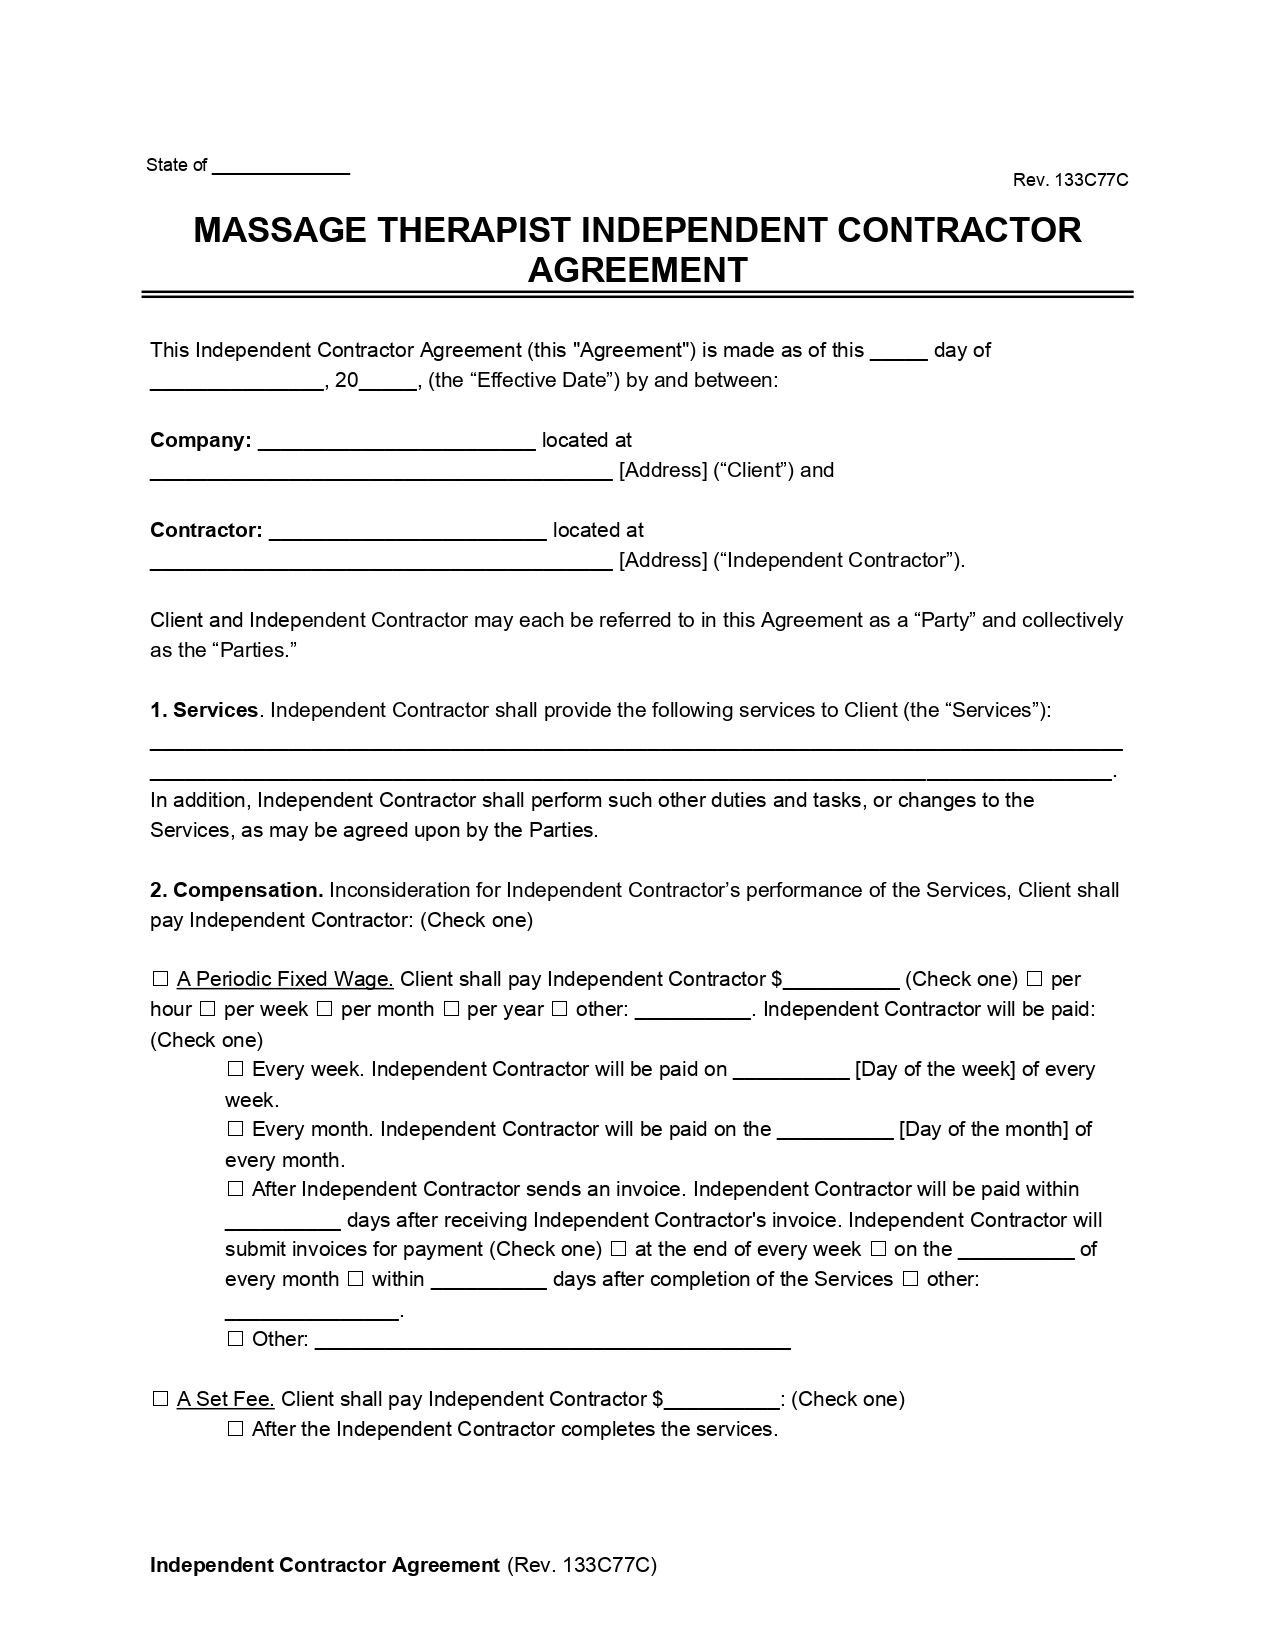 Massage Therapist Independent Contractor Agreement